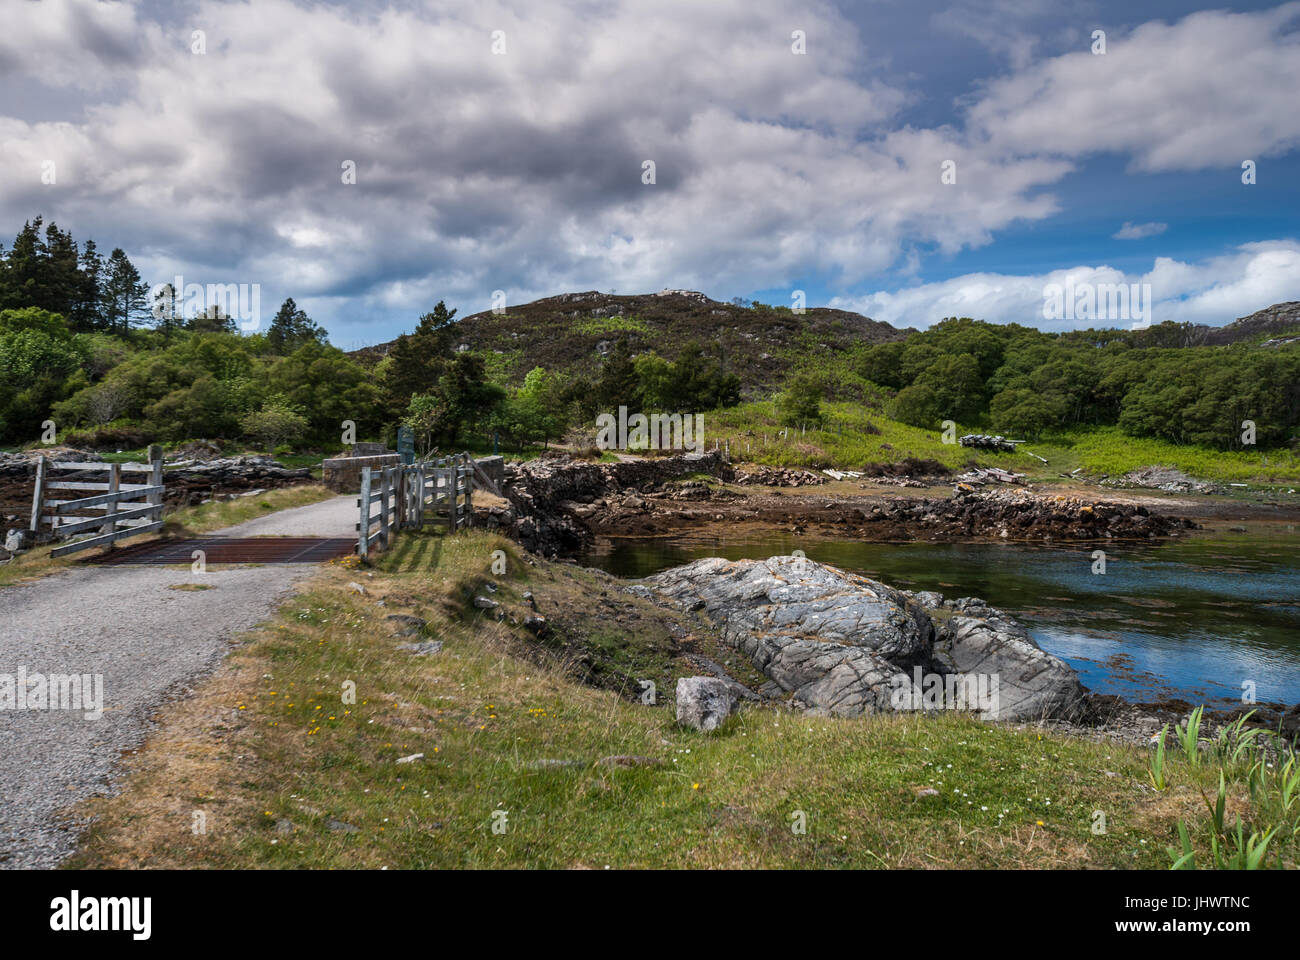 Assynt Peninsula, Scotland - June 7, 2012: Short stone bridge with cattle grill over creek landing into Atlantic Ocean inlet South of Loch An Arbhair  Stock Photo